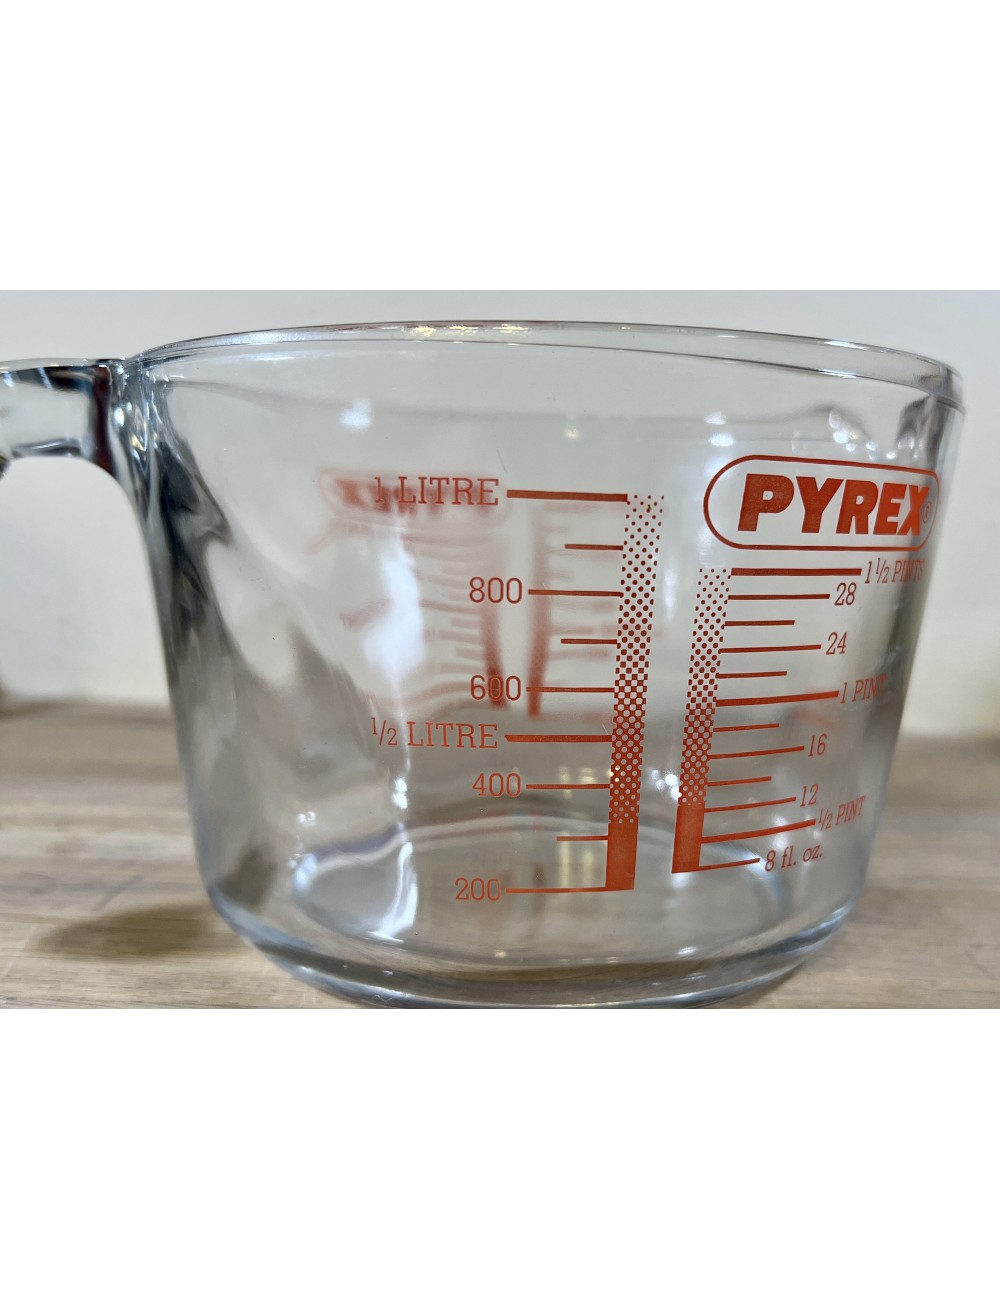 https://www.ramblingrose.nl/14518-large_default/measuring-cup-pyrex-thick-glass-model-with-size-markings.jpg